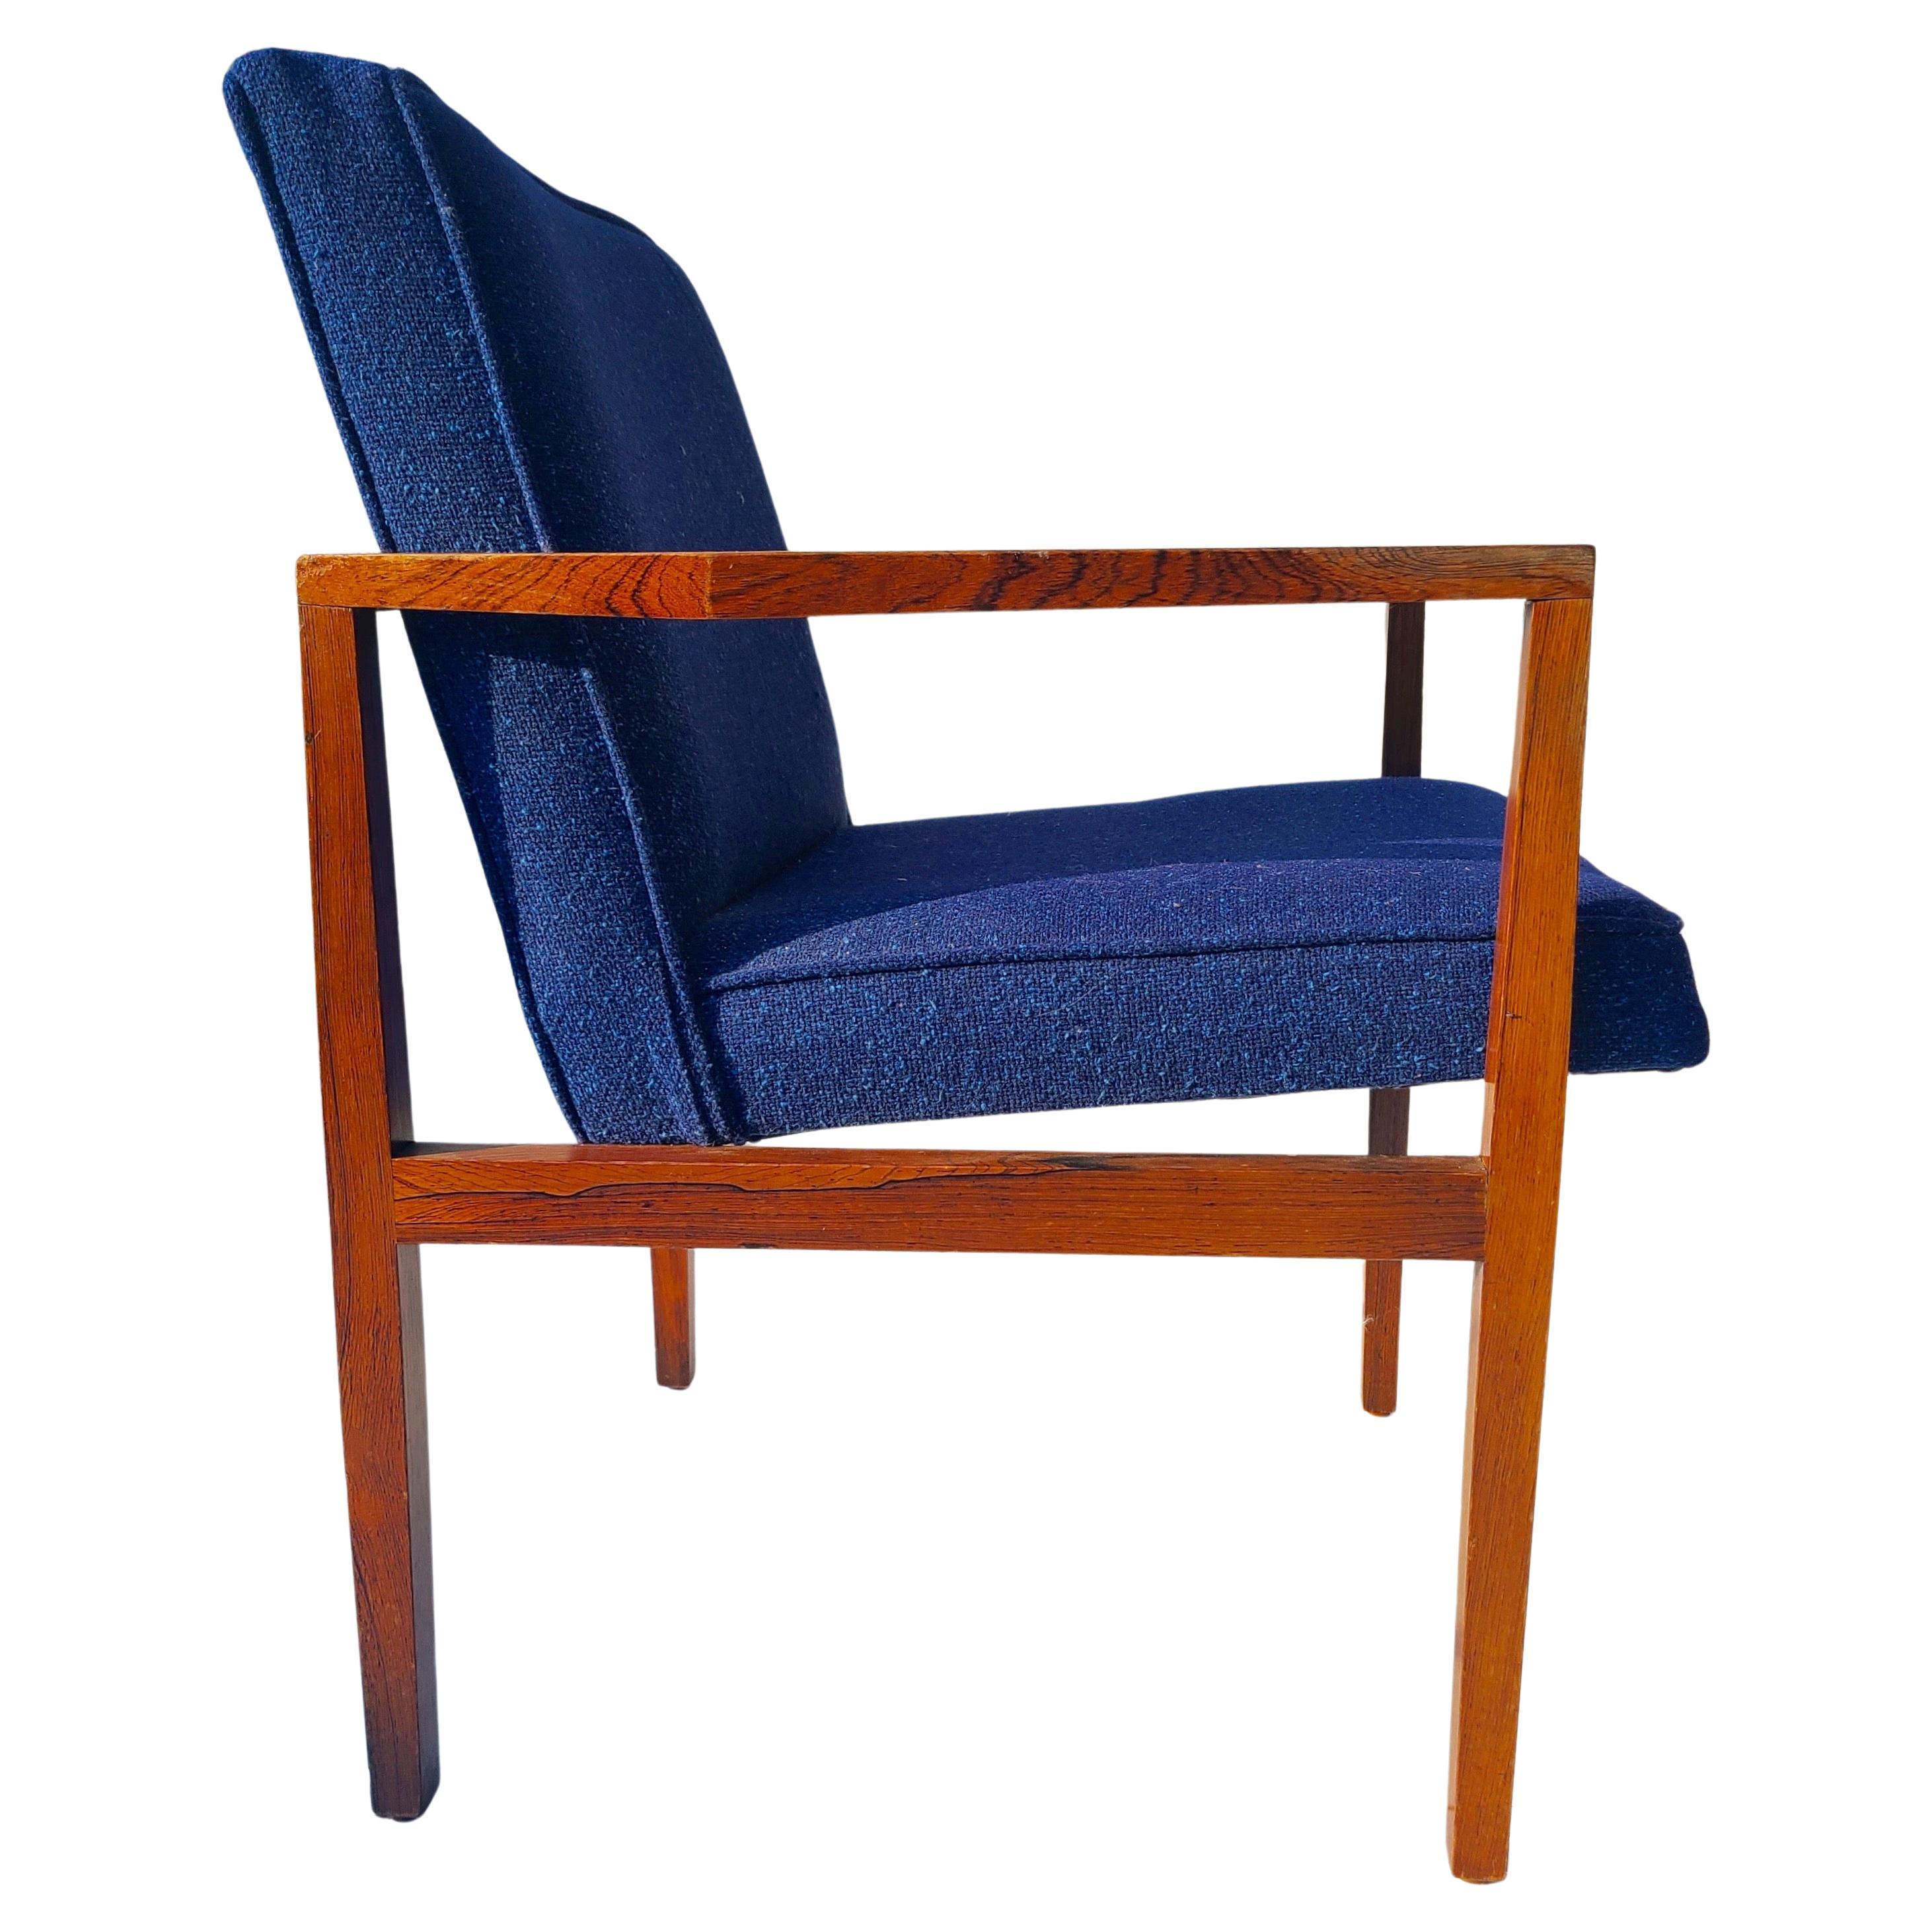 Rosewood open arm chair. Designed by Lewis Butler for Knoll.
Unrestored.
Scratch at elbow rest right hand seated.

 